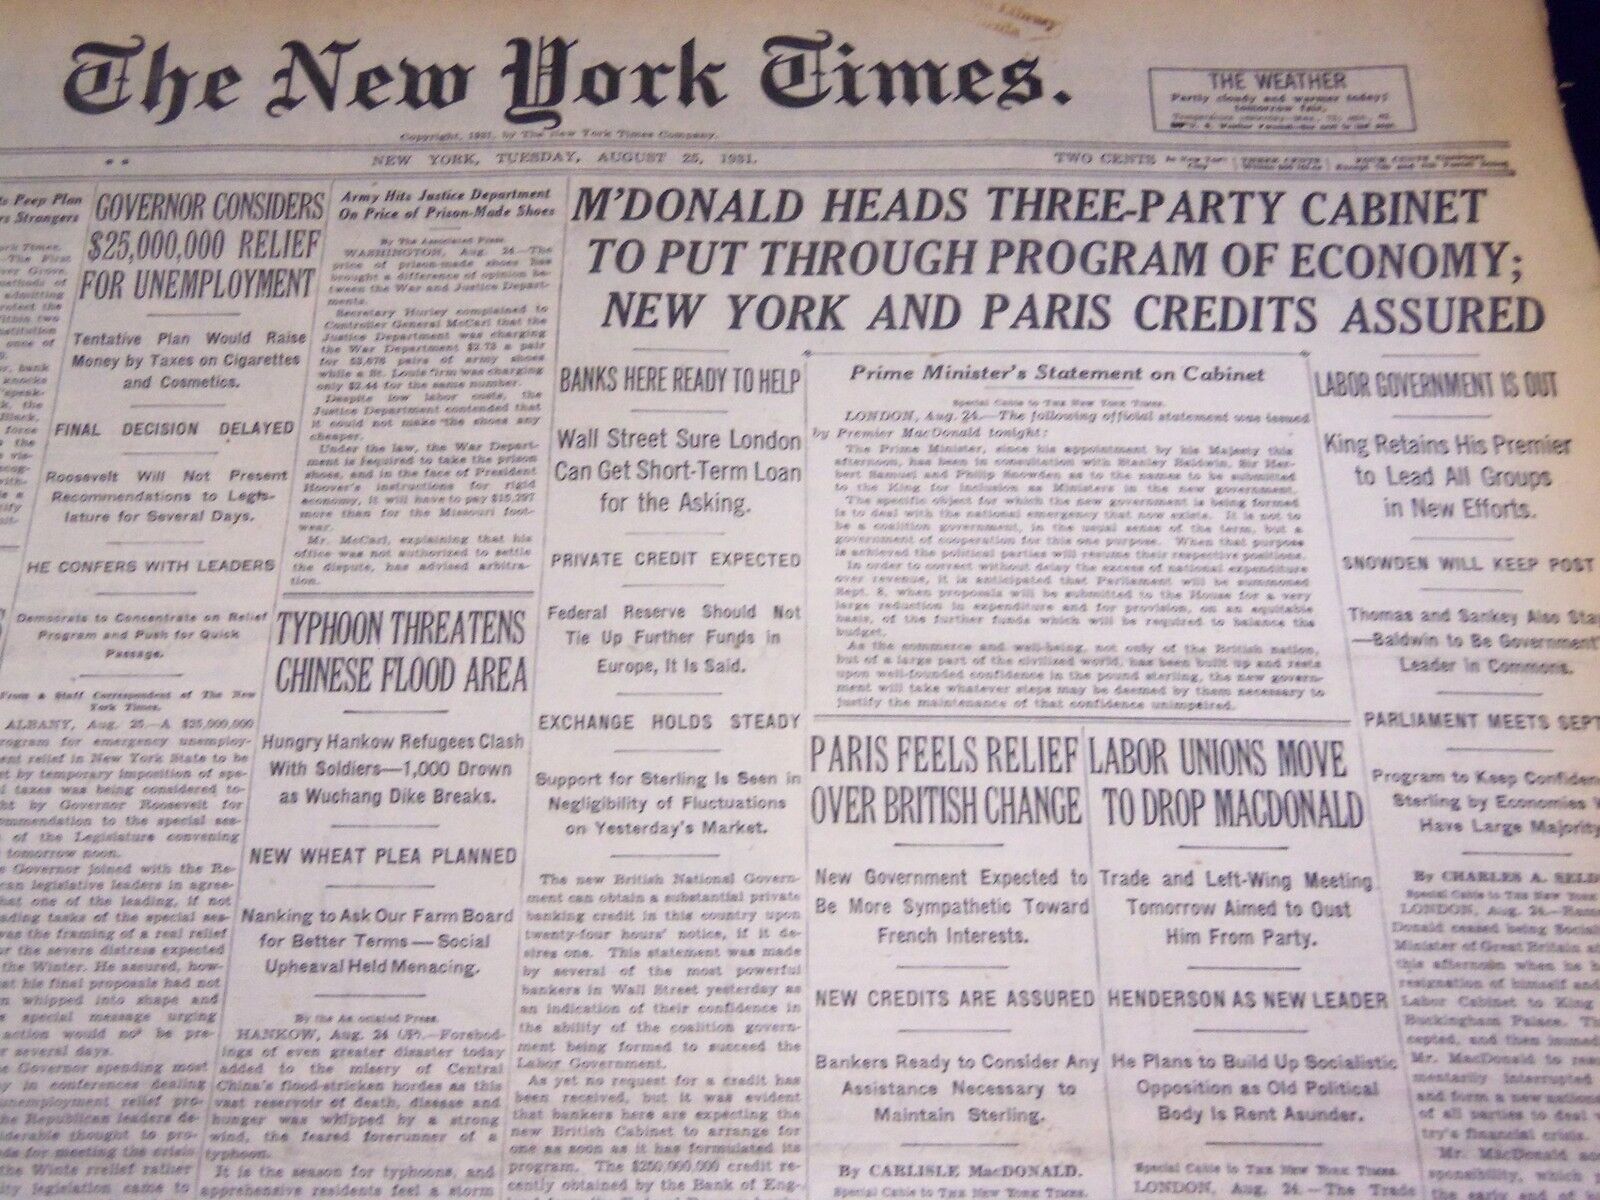 1931 AUG 25 NEW YORK TIMES - M'DONALD HEADS THREE PARTY CABINET, LABOR - NT 2438